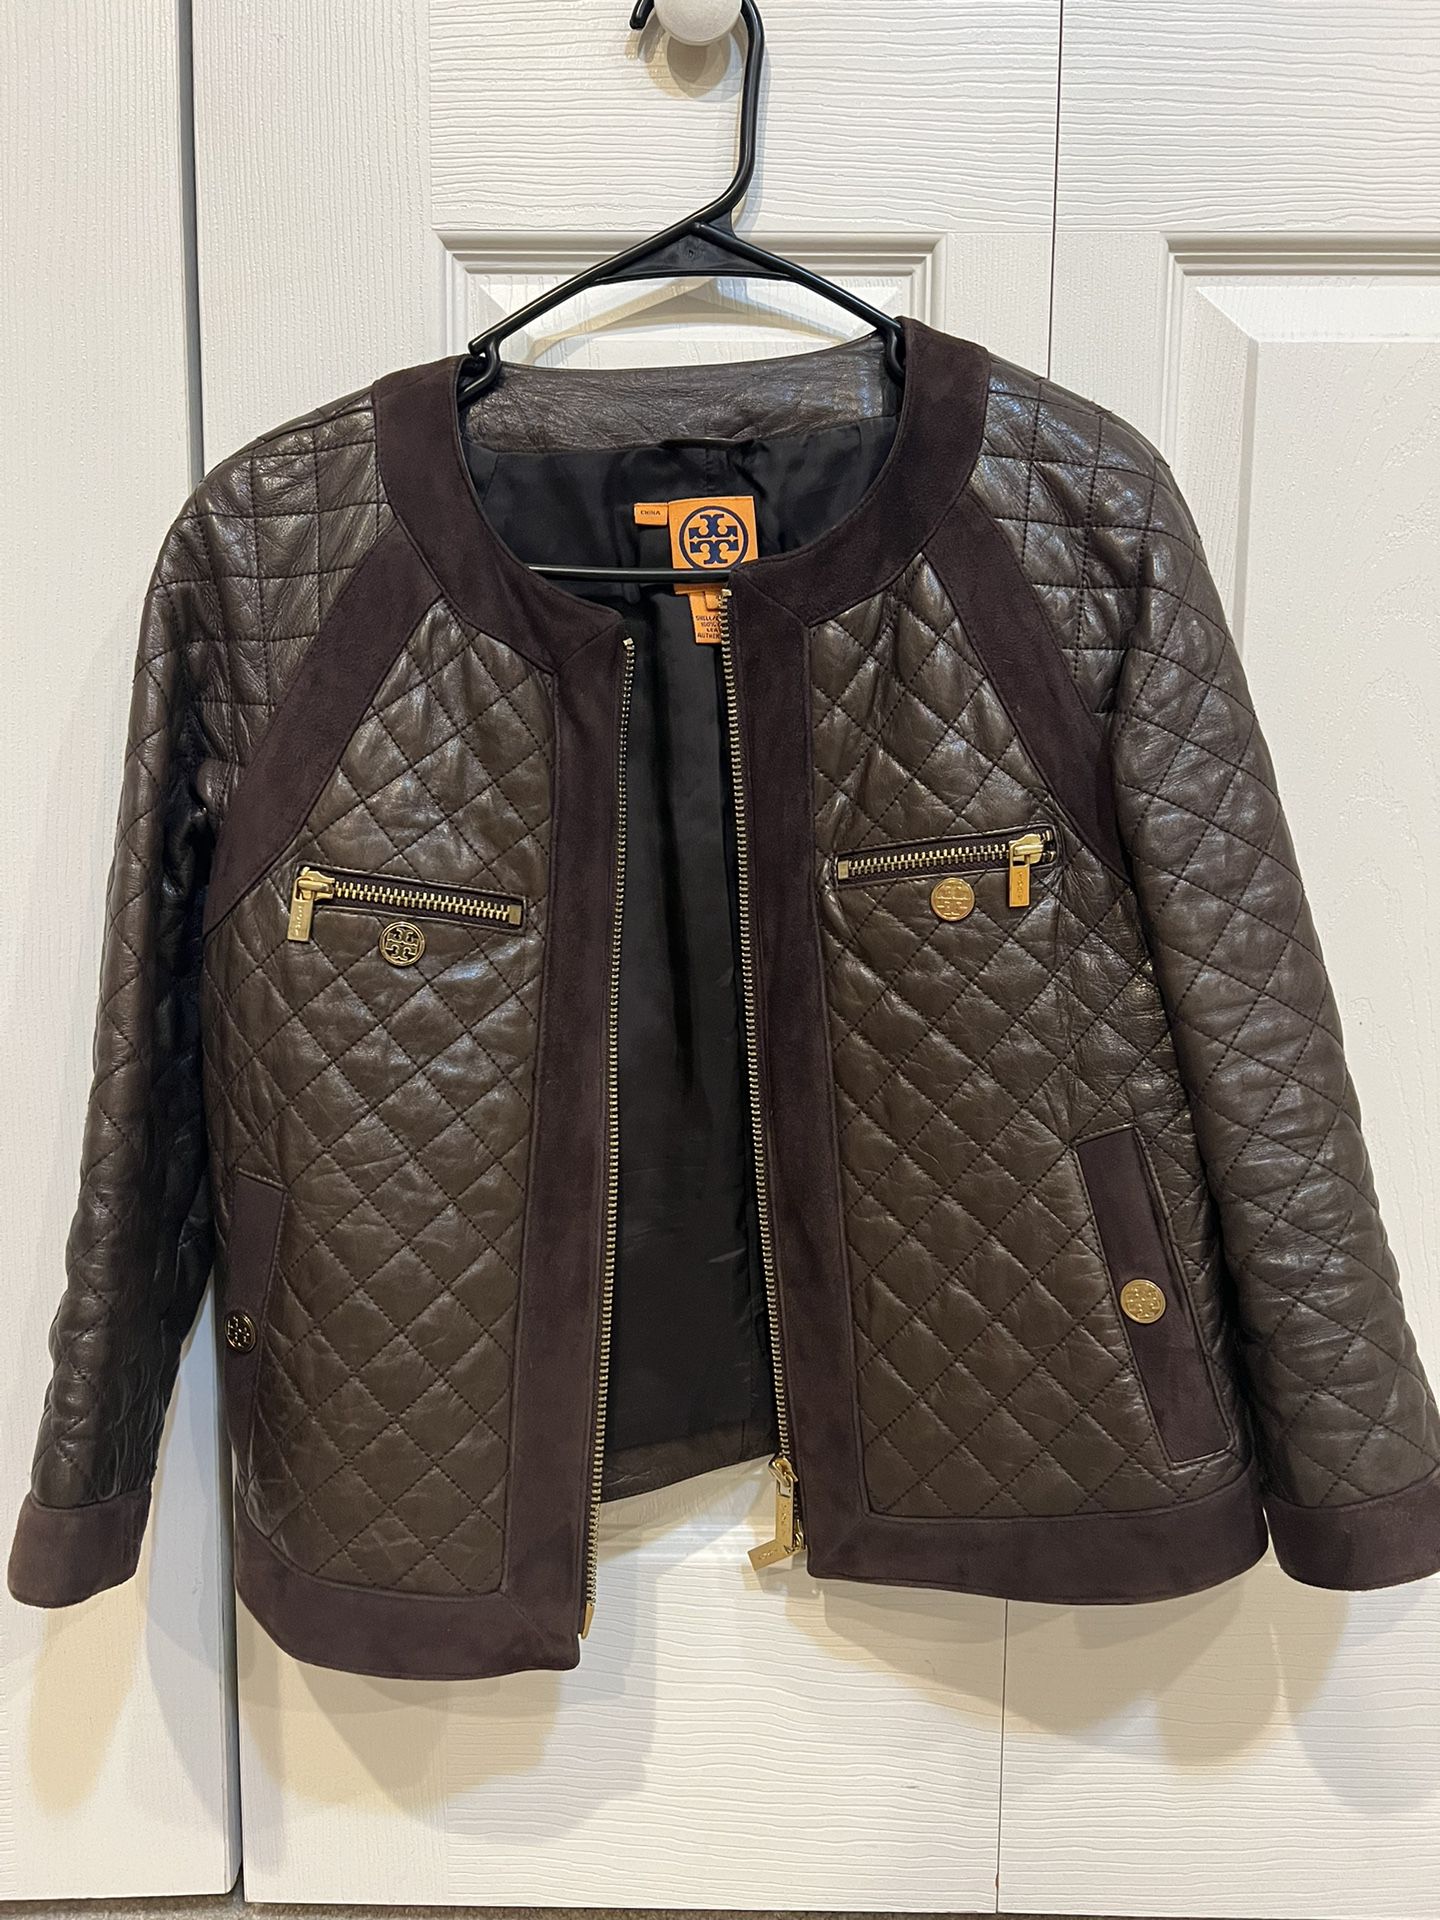 Tory burch leather and suede jacket size 4